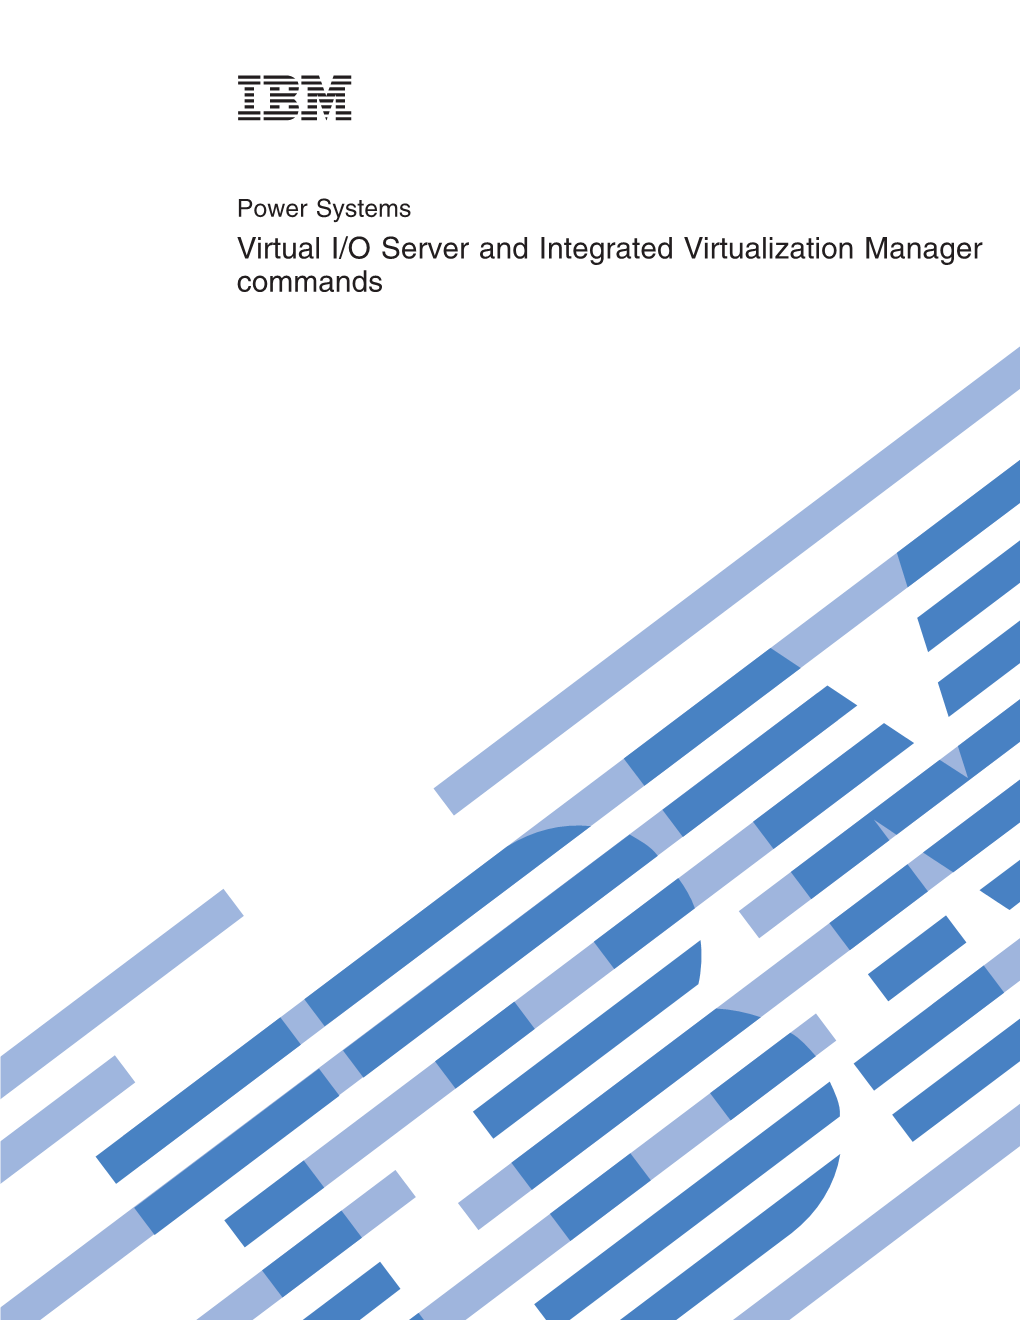 Virtual I/O Server and Integrated Virtualization Manager Commands